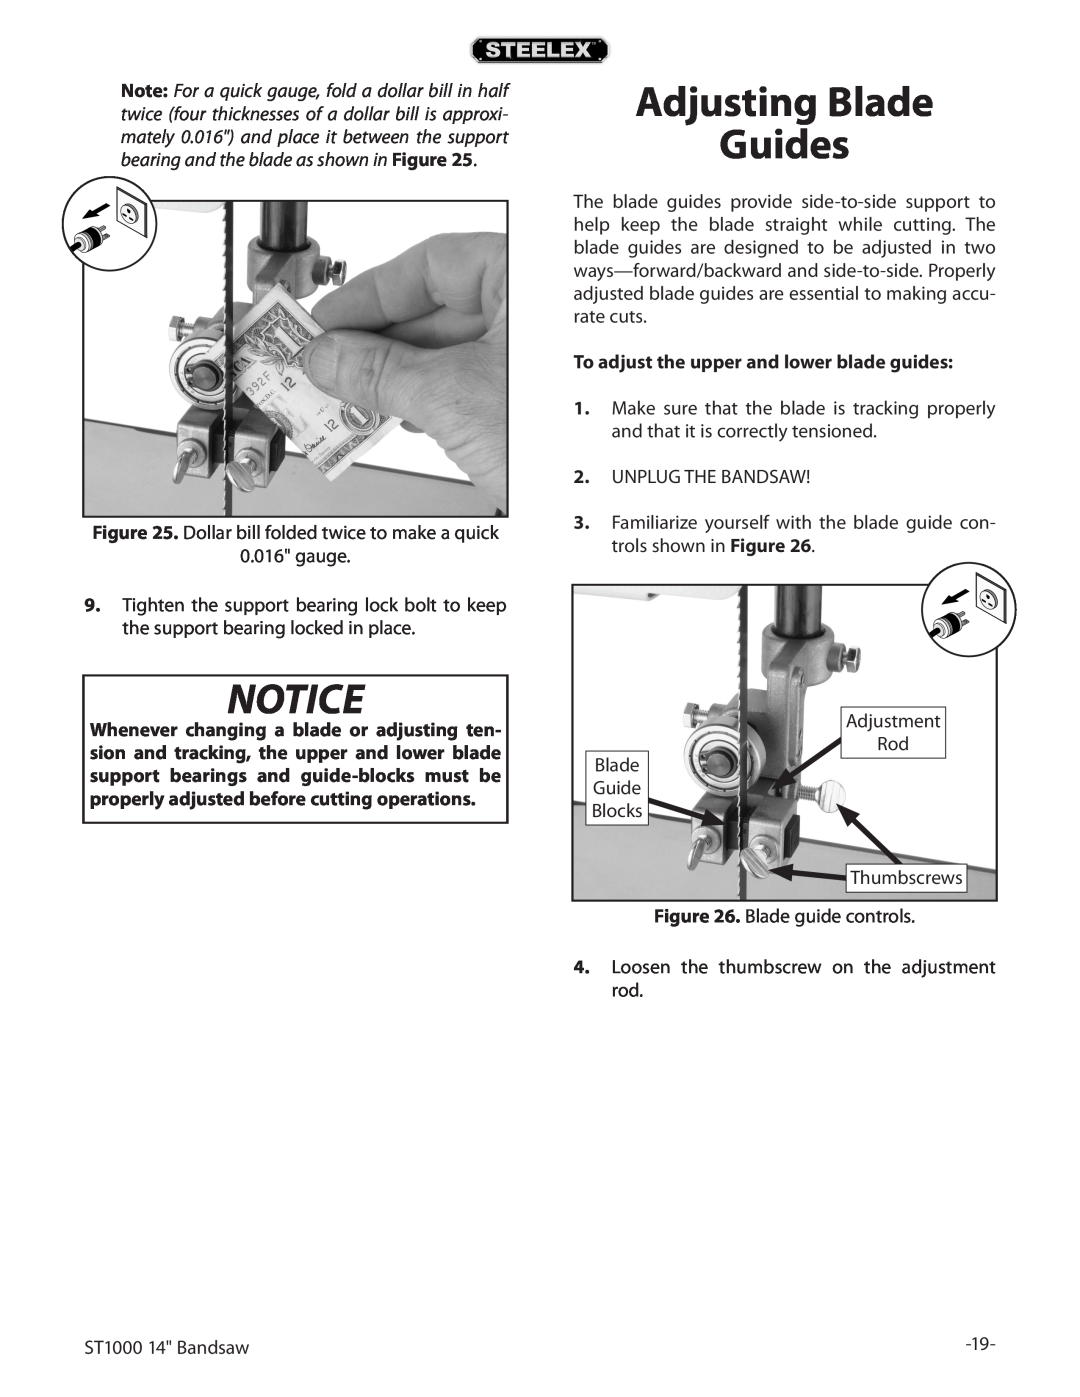 Woodstock ST1000 owner manual Adjusting Blade Guides, To adjust the upper and lower blade guides 